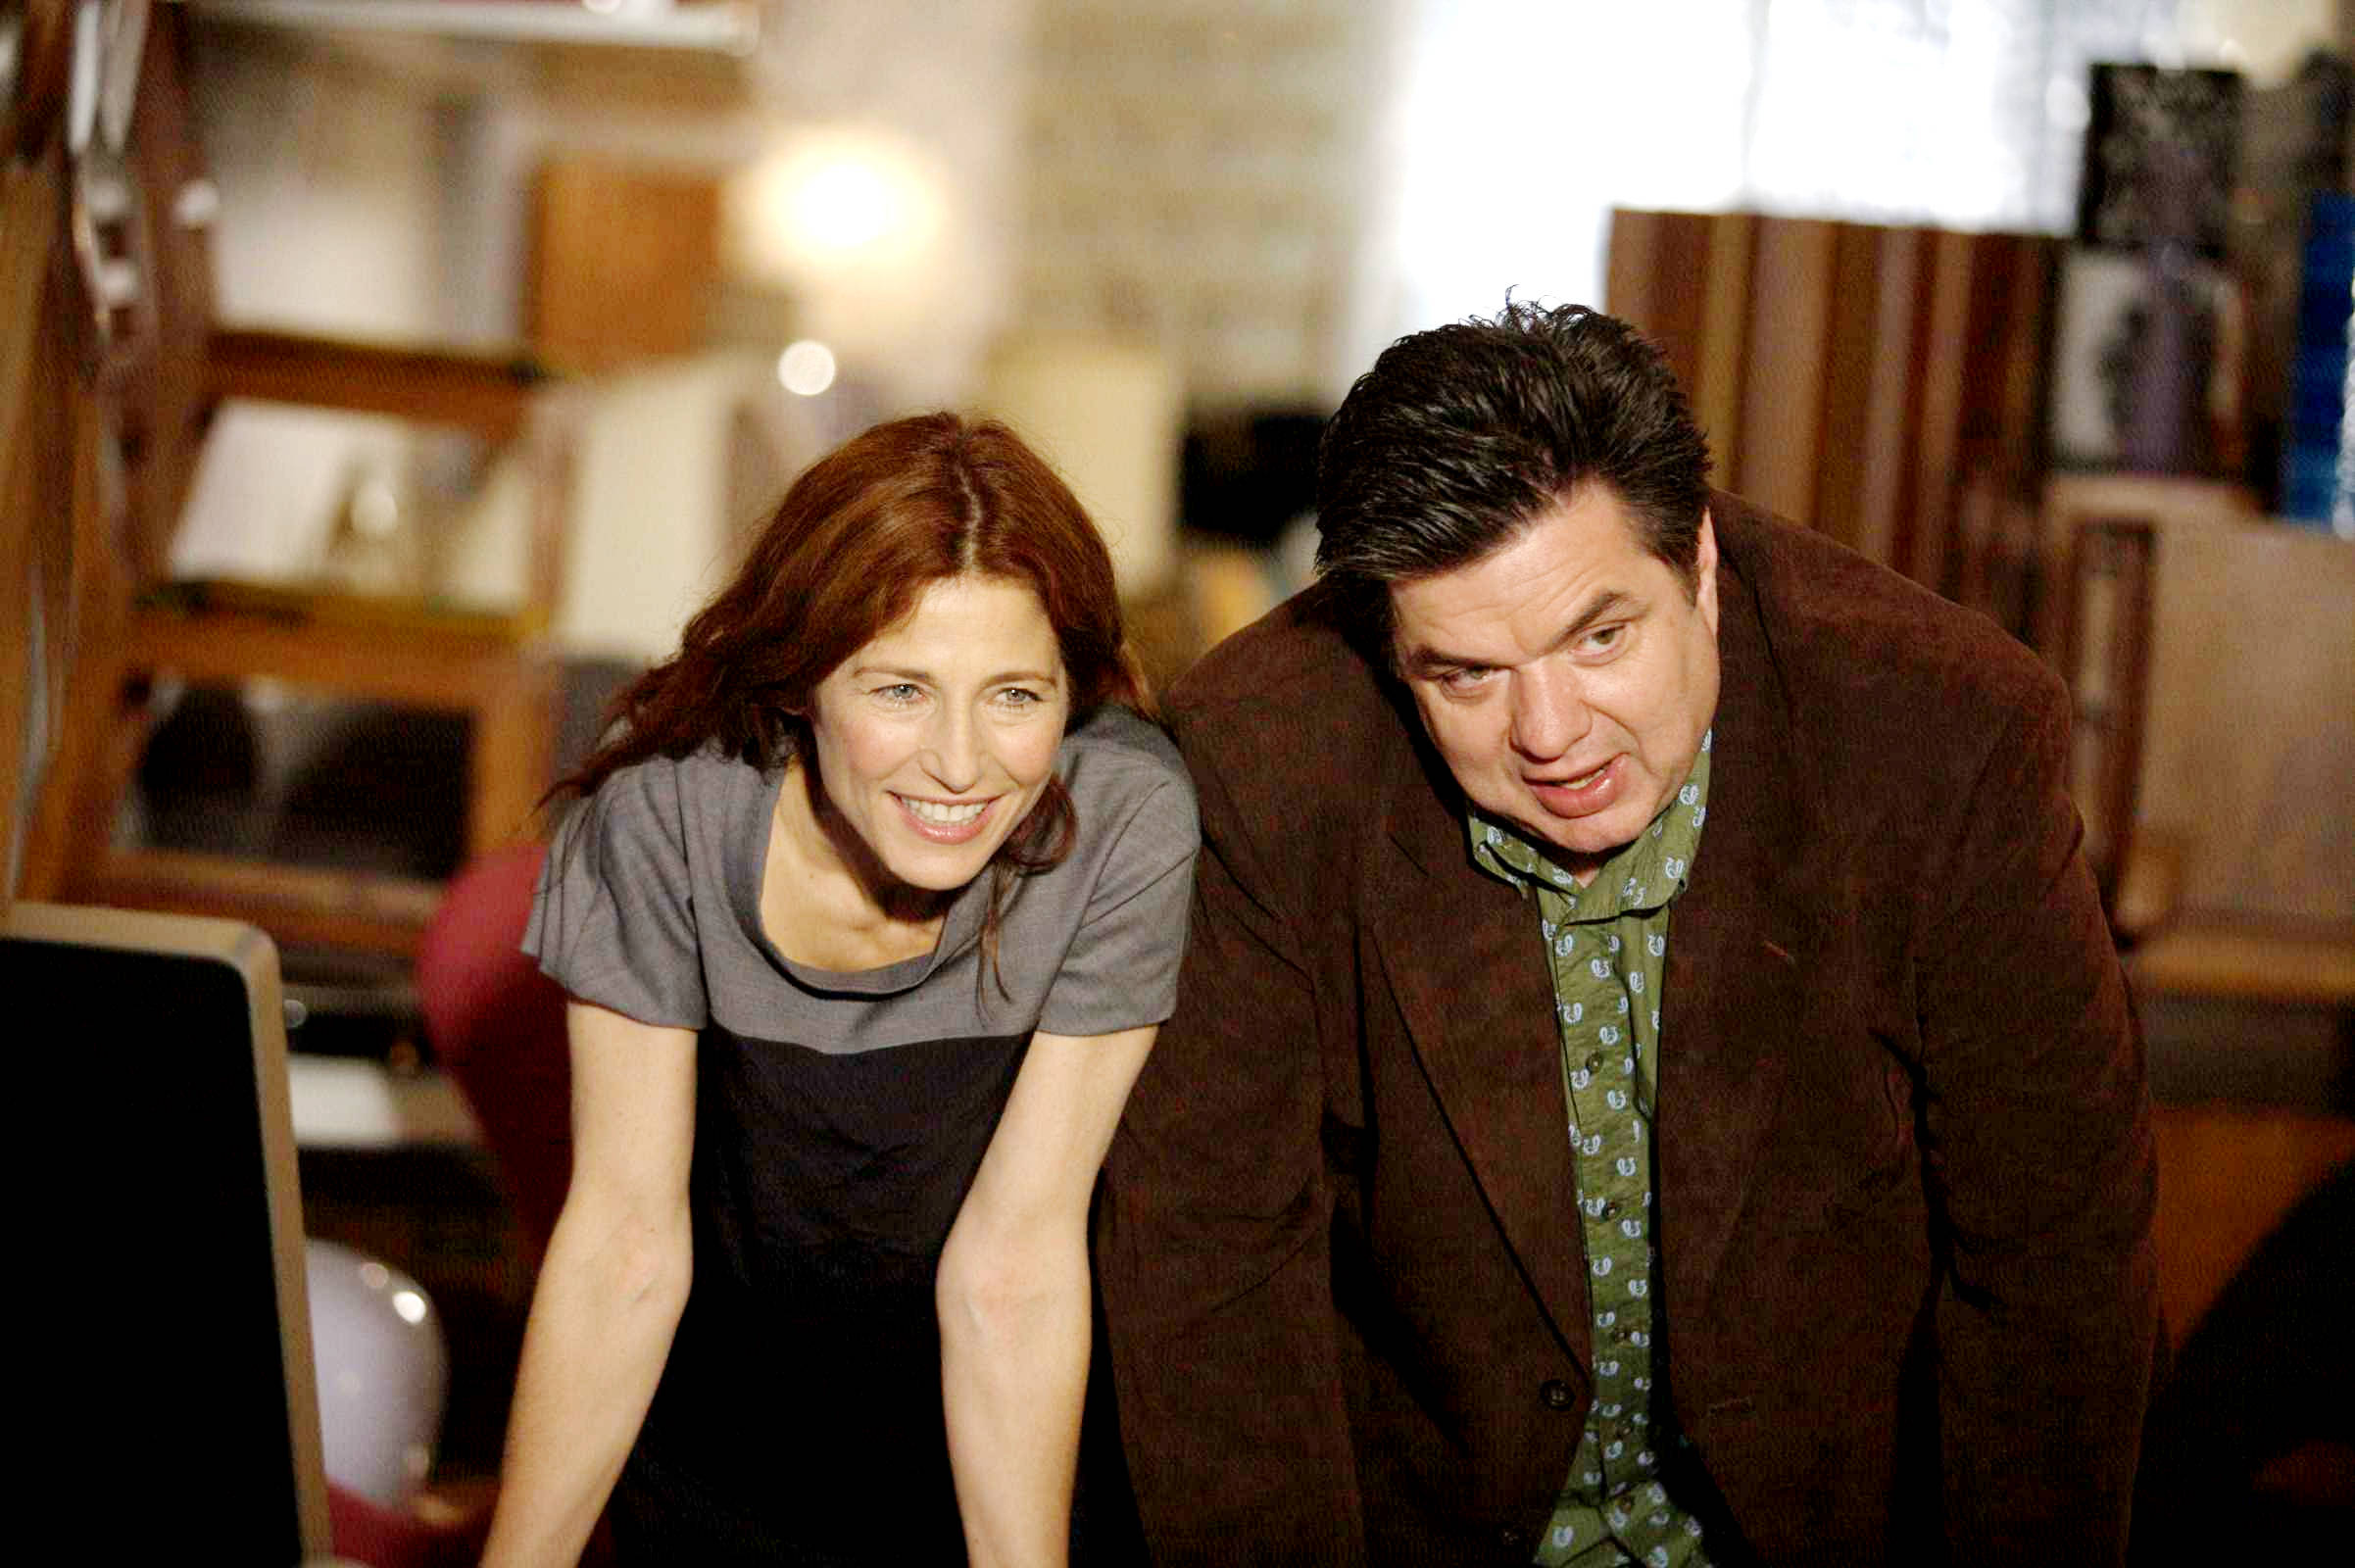 Catherine Keener stars as Kate and Oliver Platt stars as Alex in Sony Pictures Classics' Please Give (2010). Photo credit by Piotr Redlinksi.